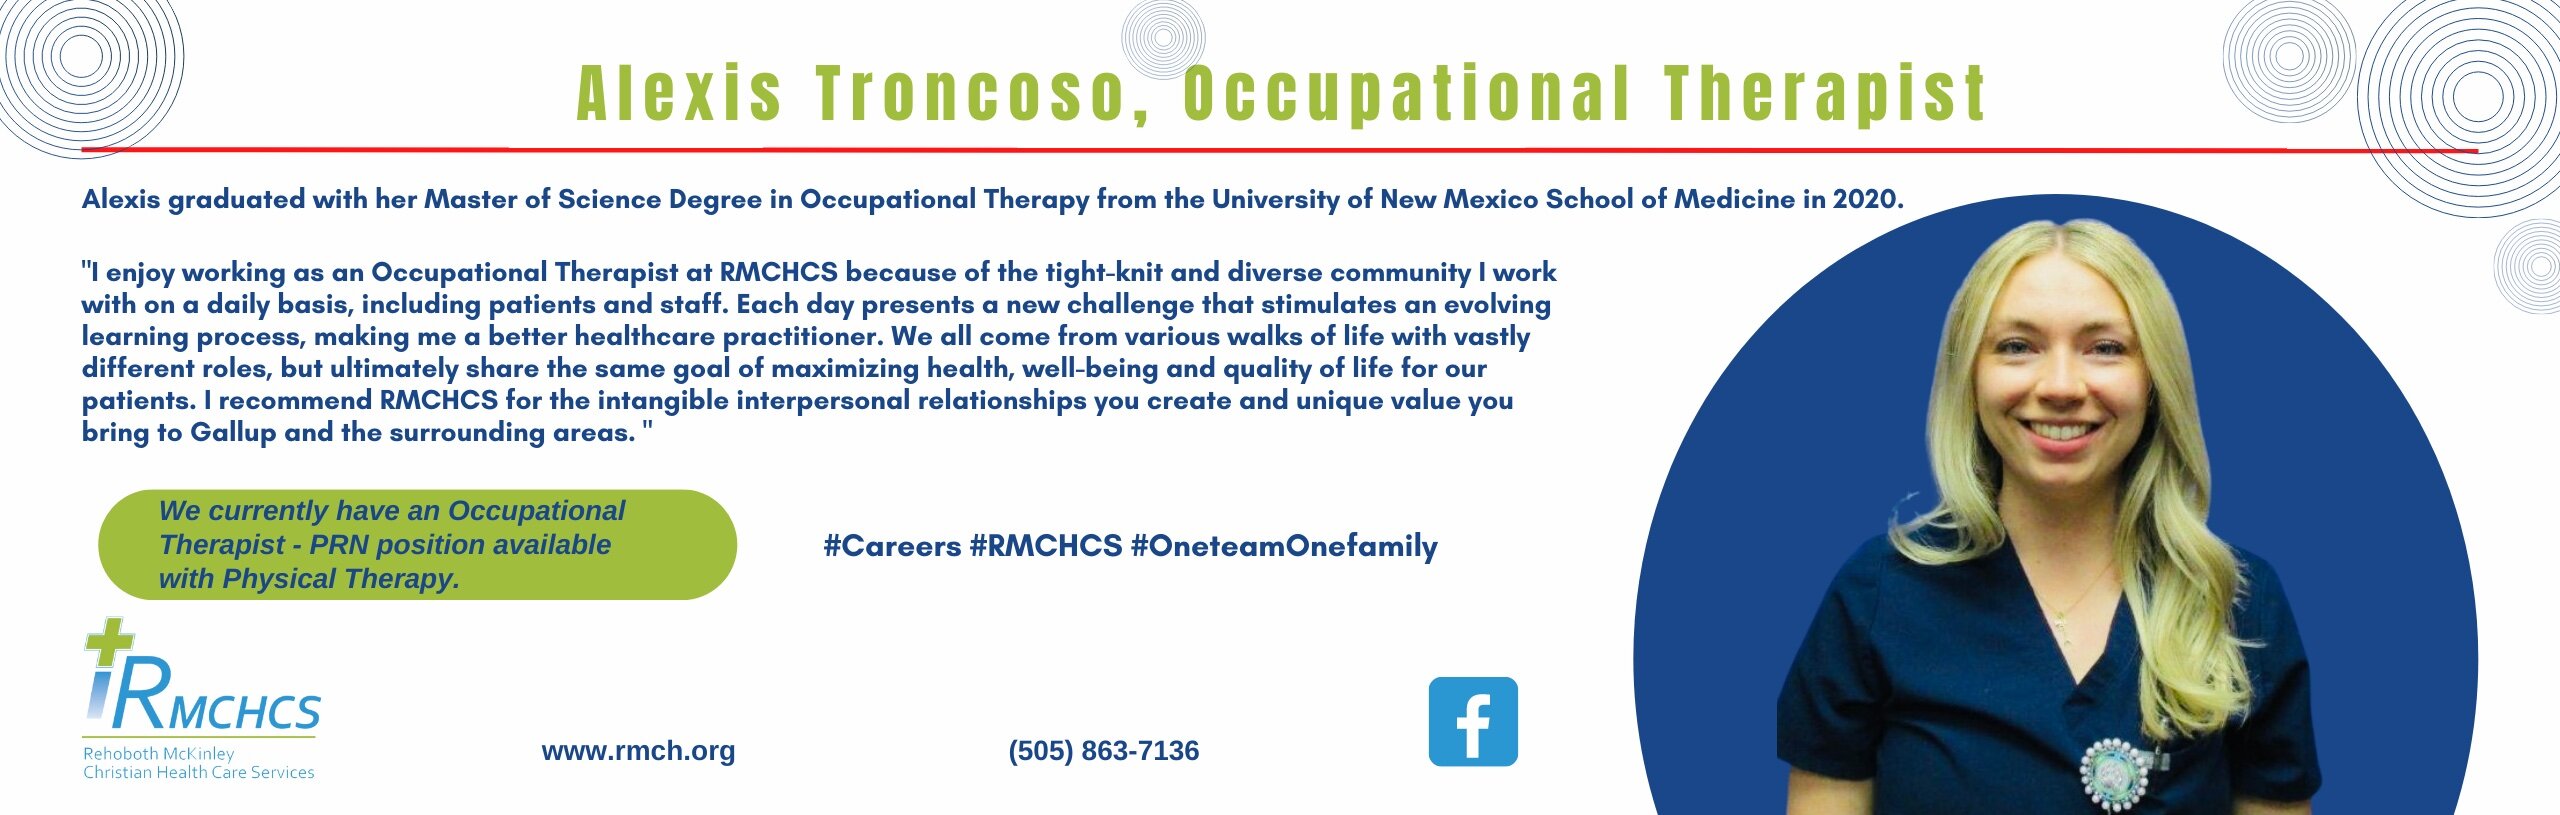 Banner picture of Alexis Troncoso smiling. Banner says:

Alexis graduated with her Master of Science Degree in Occupational Therapy from The University of New Mexico School of Medicine in 2020.

"I enjoy working as an Occupational Therapist at RMCHS because of the tight-knit and diverse community I I work with on a daily basis, including patients and staff. Each day presents a new challenge that stimulates an evolving learning process, making me a better healthcare practitioner .  We all come from various walks of life with vastly different roles, making me a better healthcare practitioner.  We all come from various walks of life with vastly different roles, but ultimately share the share the same goal of maximizing health, well-being and quality of life for our patients. I recommend RMCHCS for intangible interpersonal relationships you create and unique value you bring to Gallup and the surrounding  areas."

We currently have an Occupational Therapist- PRN position available with Physical Therapy.

#Careers #RMCHCS #OneteamOnefamily

iRMCHS
Rehoboth McKinley Christian Health Care Services
www.rmch.org
(505) 863-7136
-Facebook Logo- (f)